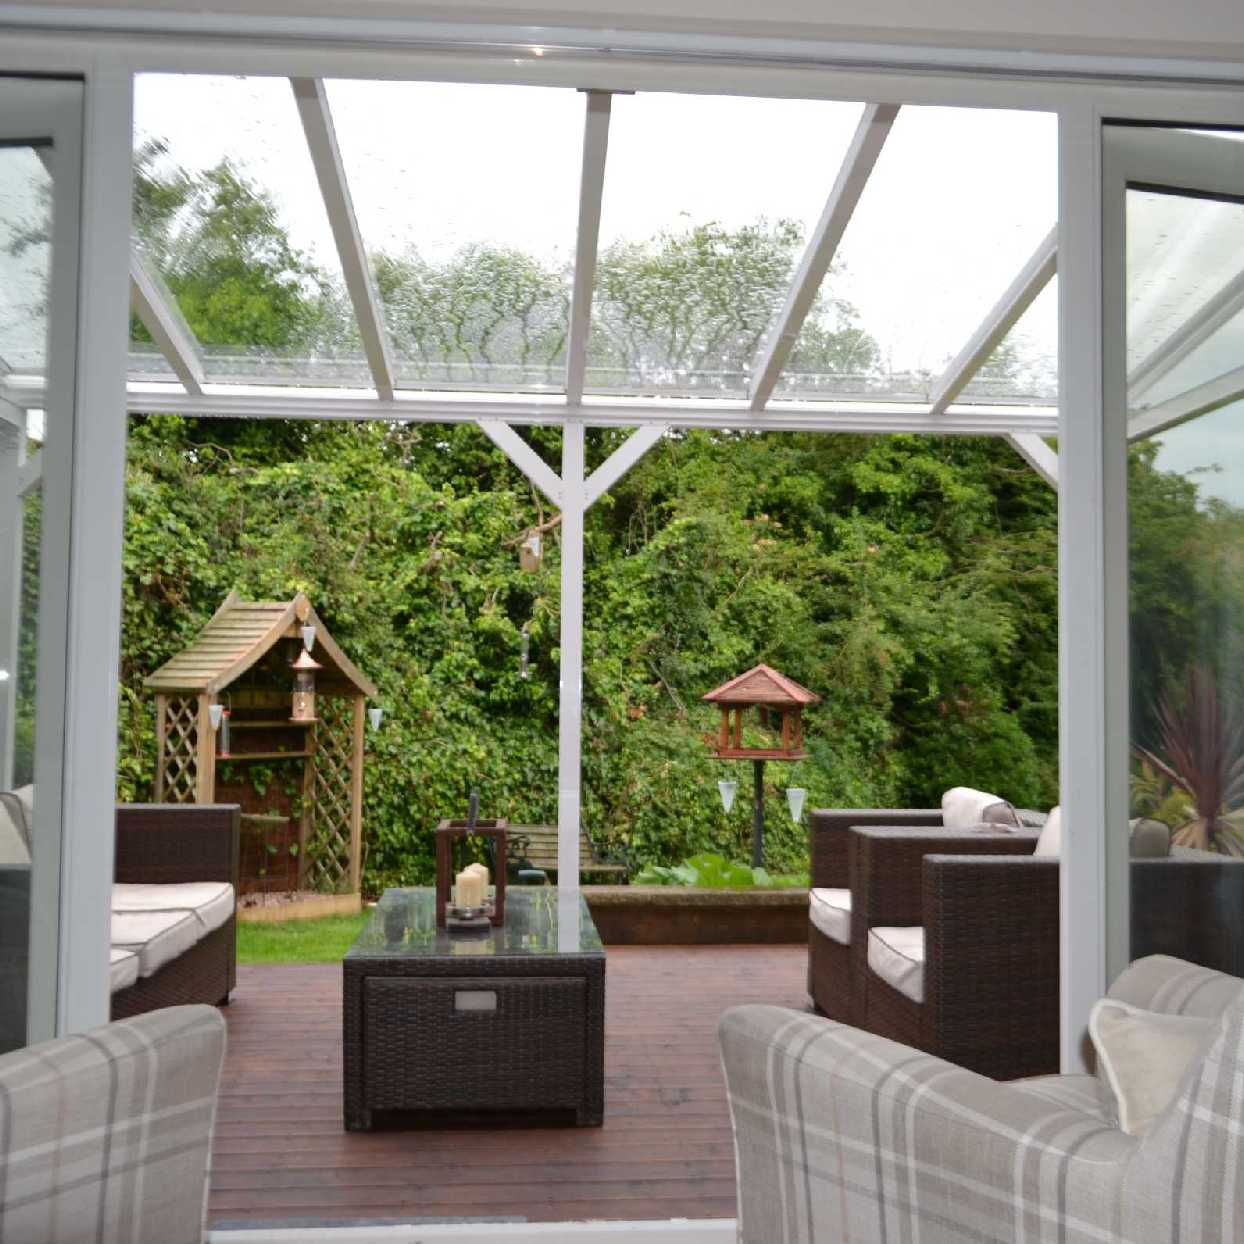 Buy Omega Smart Free-Standing, White MonoPitch Roof Canopy with 6mm Glass Clear Plate Polycarbonate Glazing - 4.2m (W) x 4.0m (P), (6) Supporting Posts online today